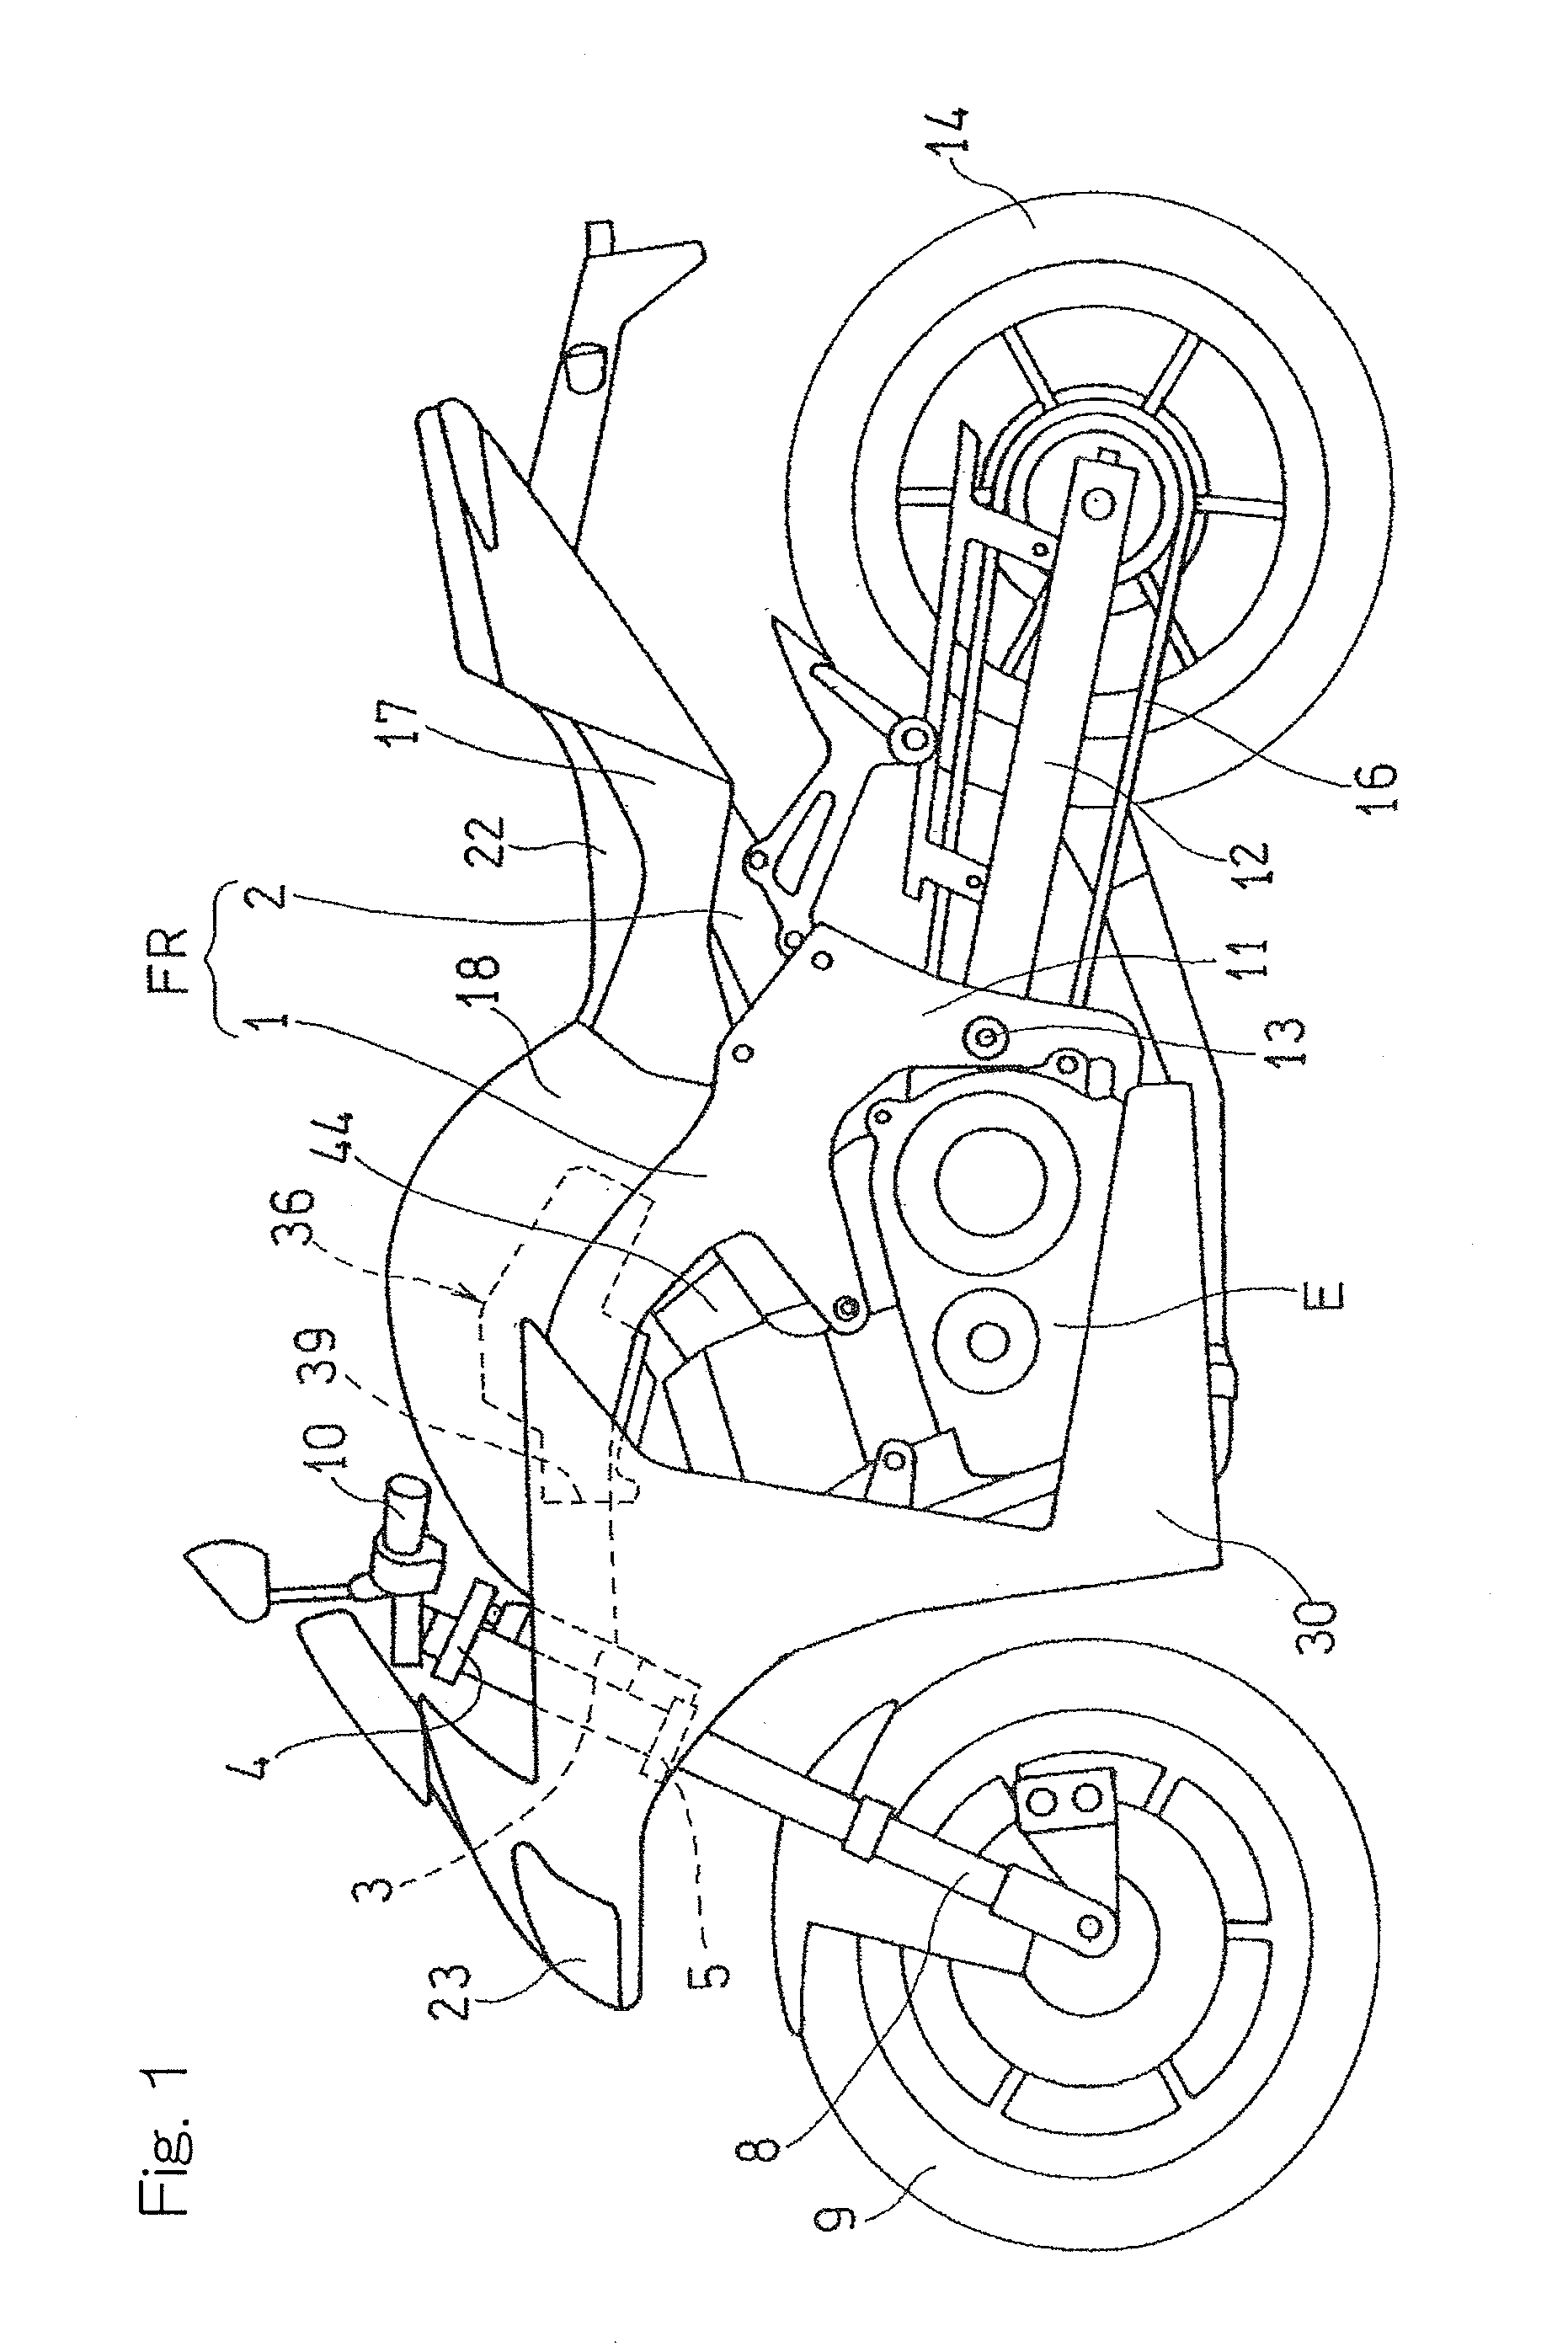 Air intake device for motorcycle